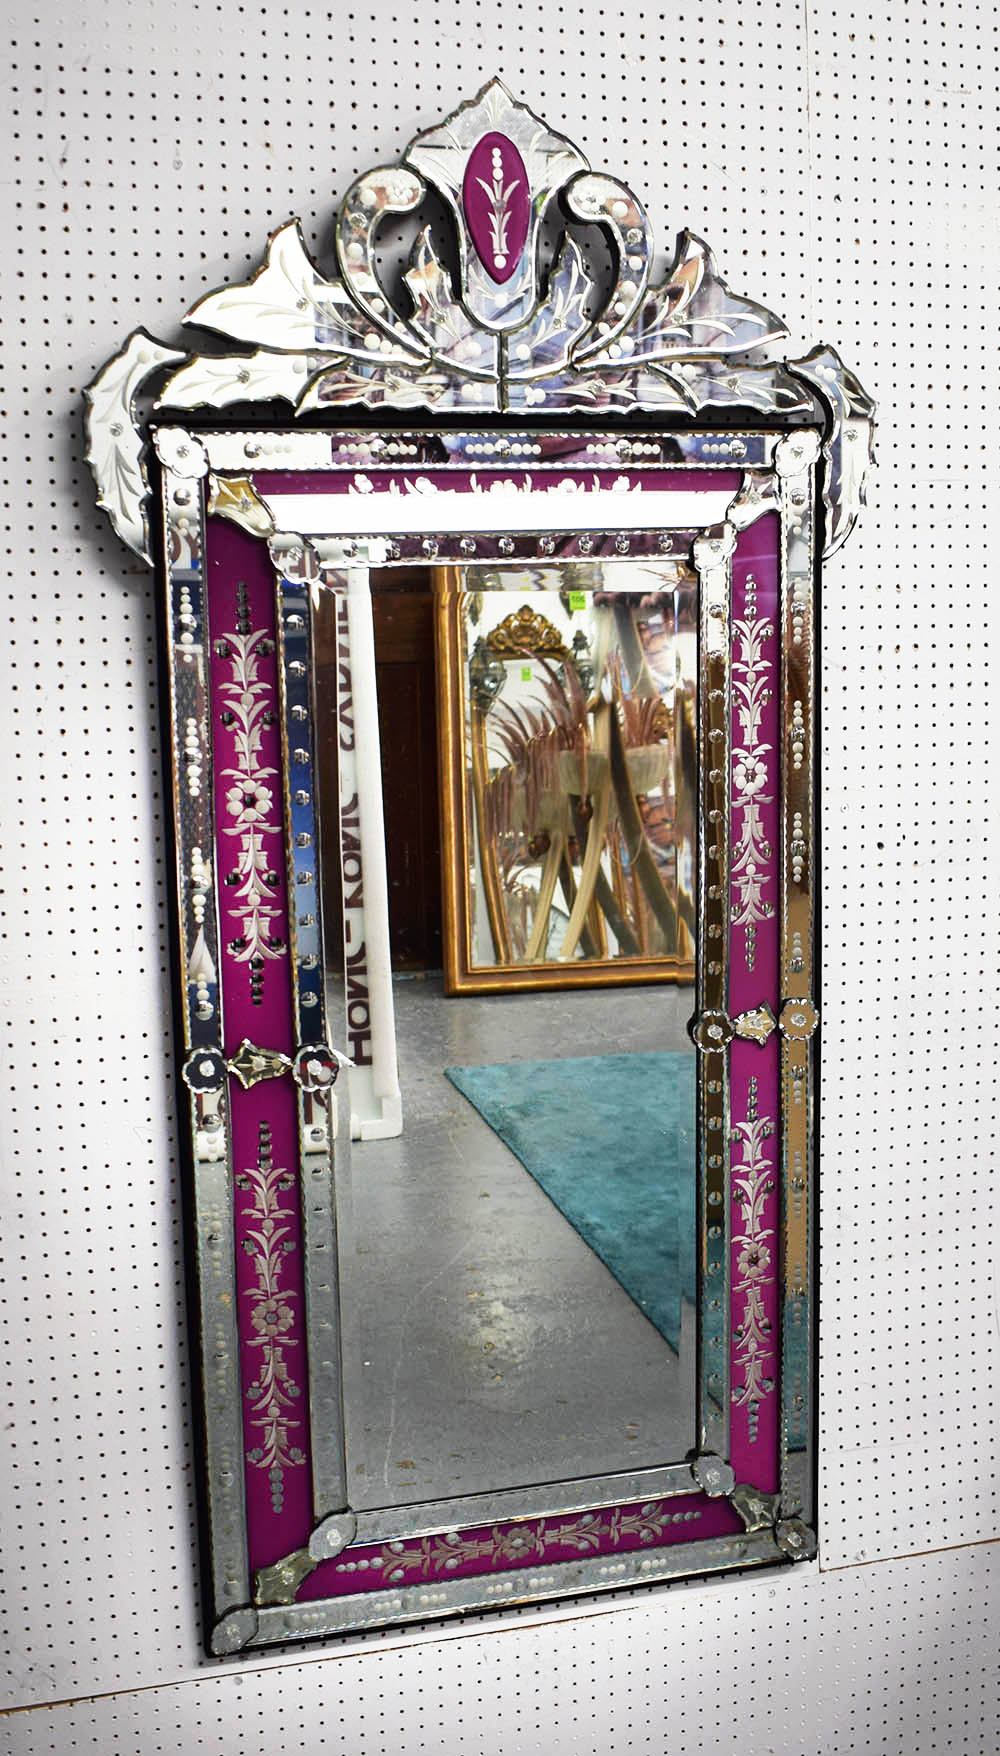 MIRROR, Venetian style, bevelled plate with etched mirrored surround, 141cm x 71cm.